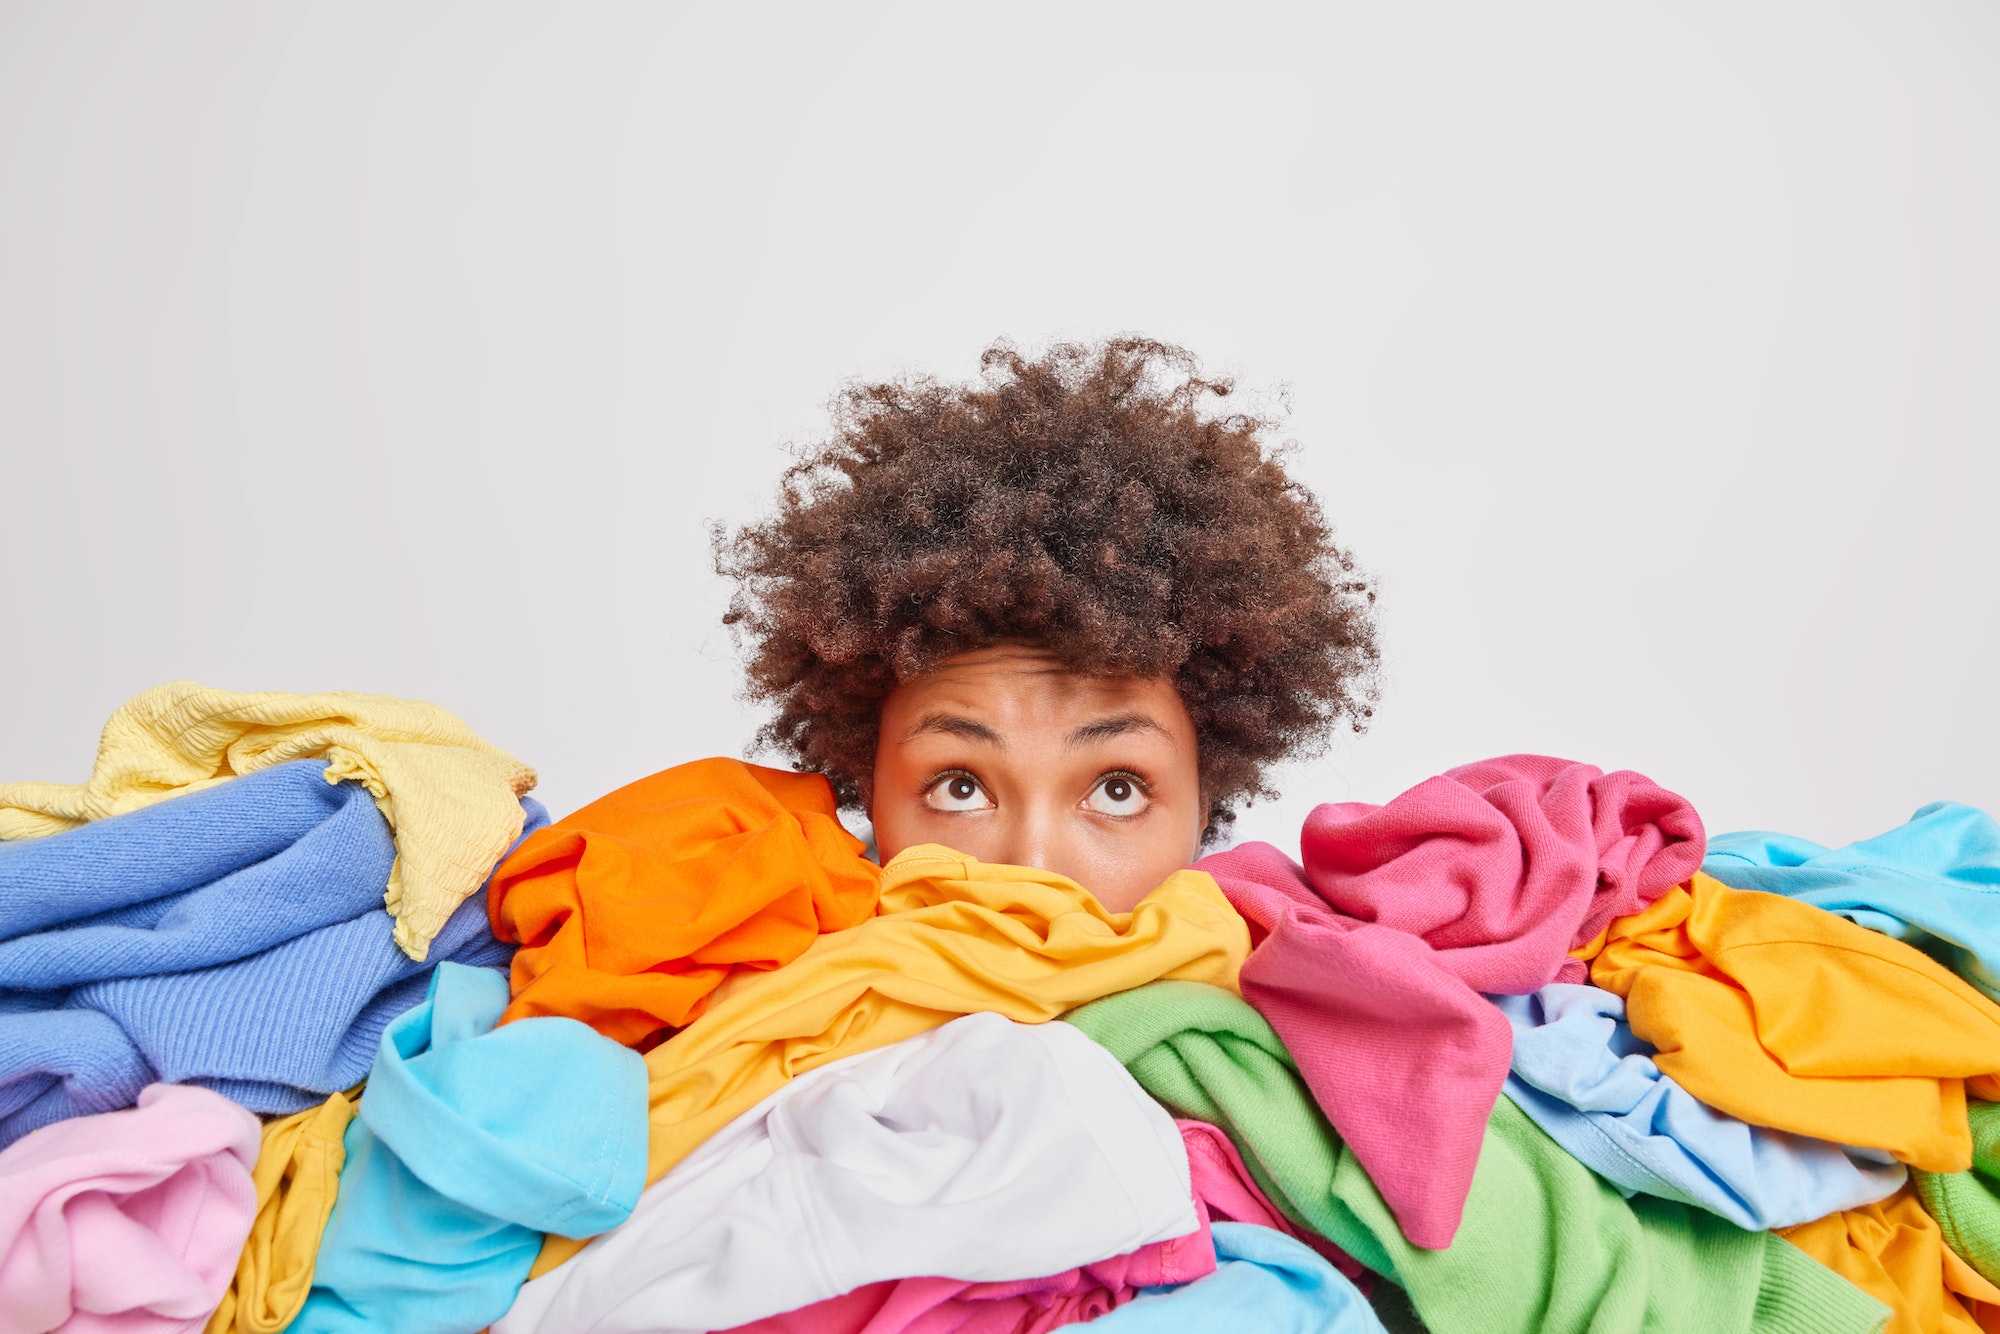 Wondered curly haired ethnic woman focused above surrounded by multicolored laundry cluttered with c